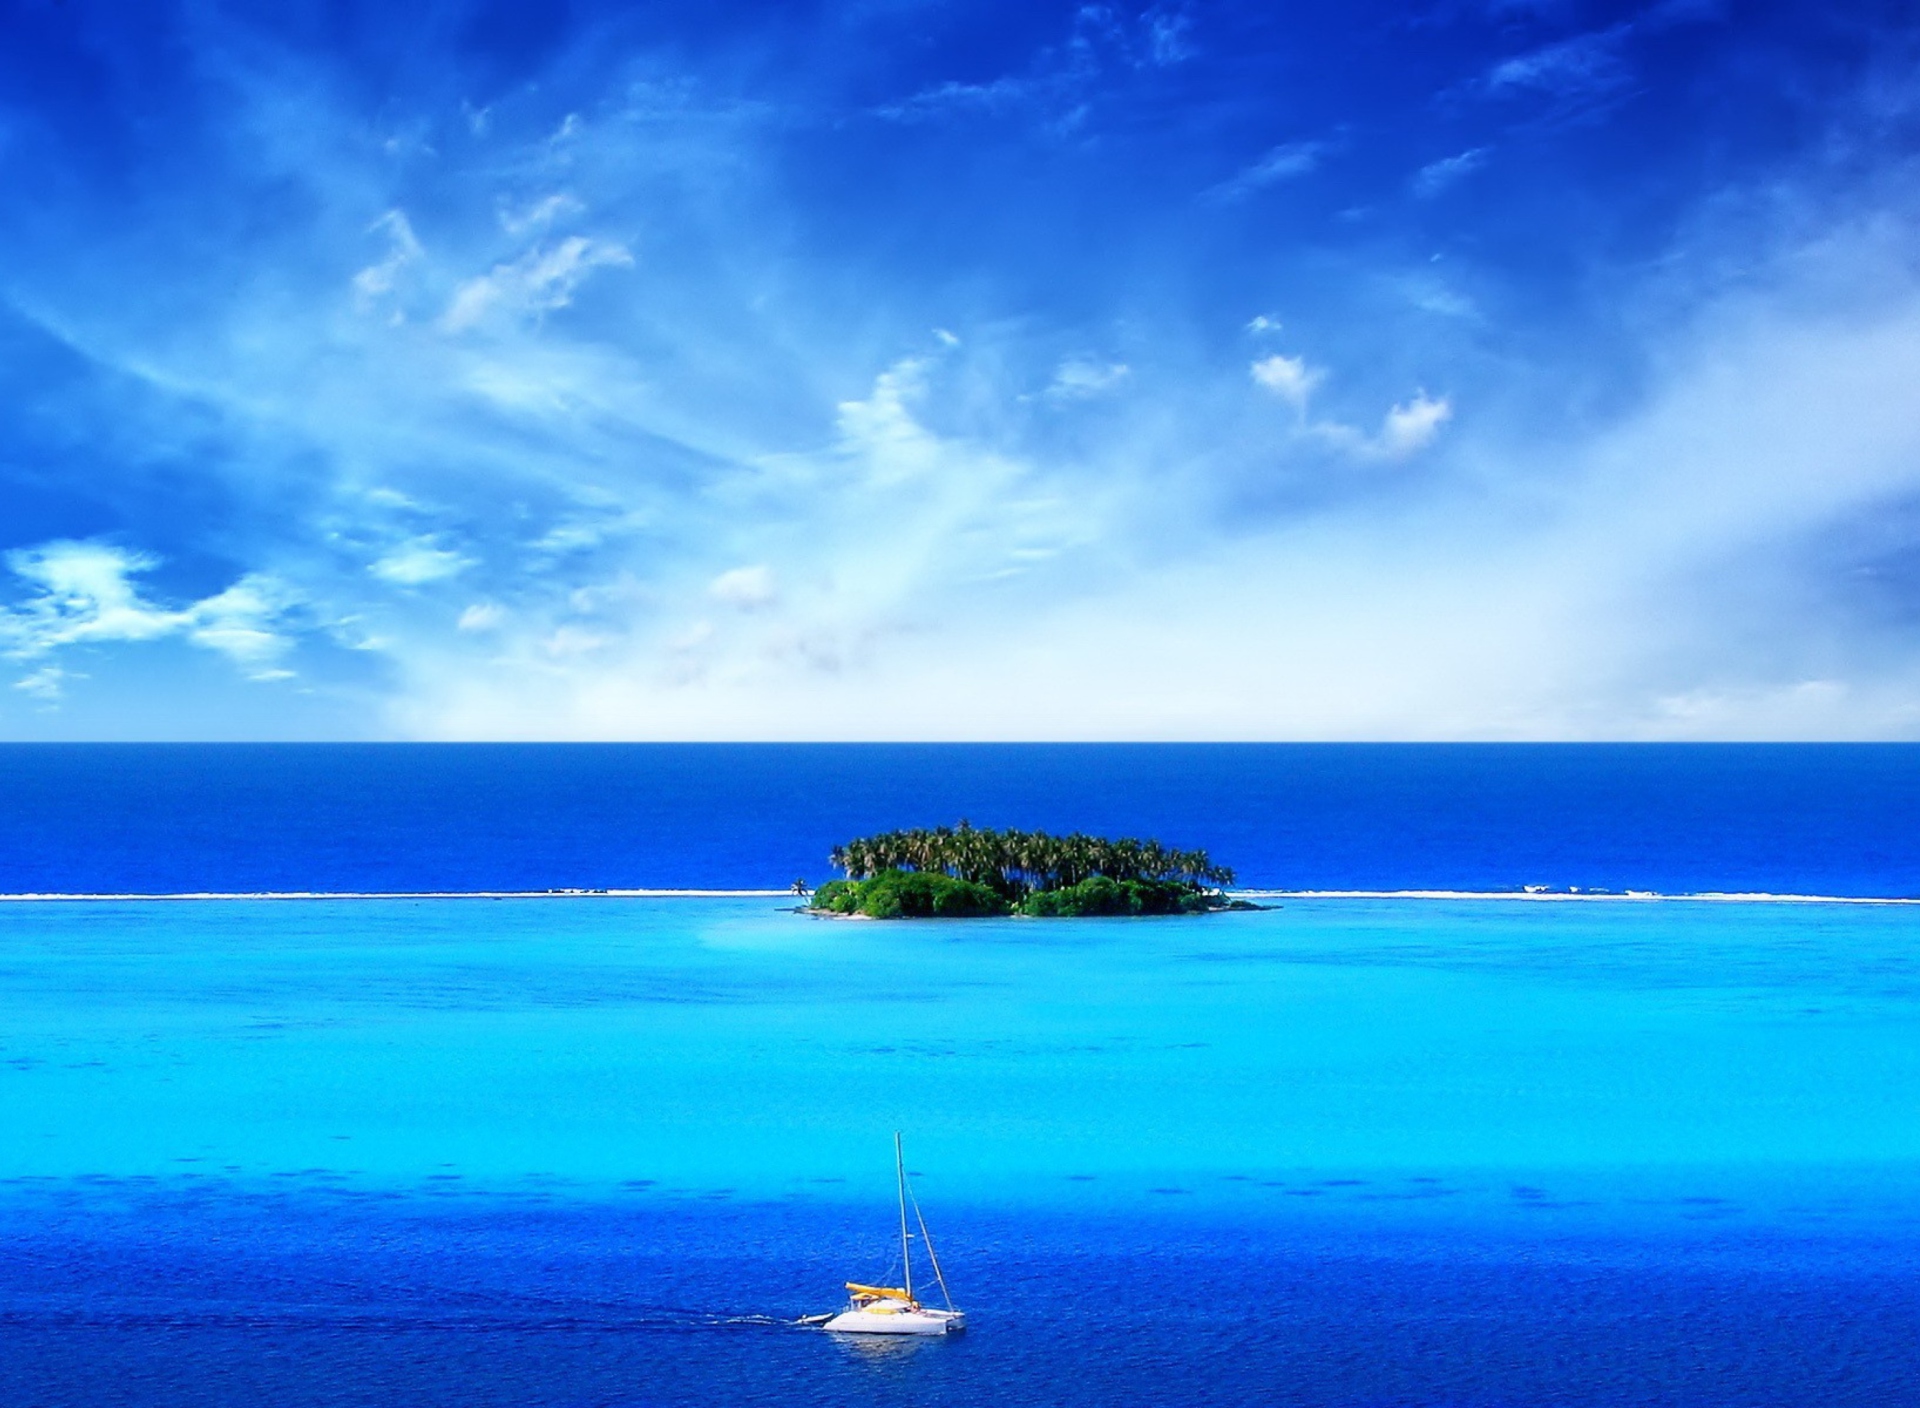 Green Island In Middle Of Blue Ocean And White Boat screenshot #1 1920x1408